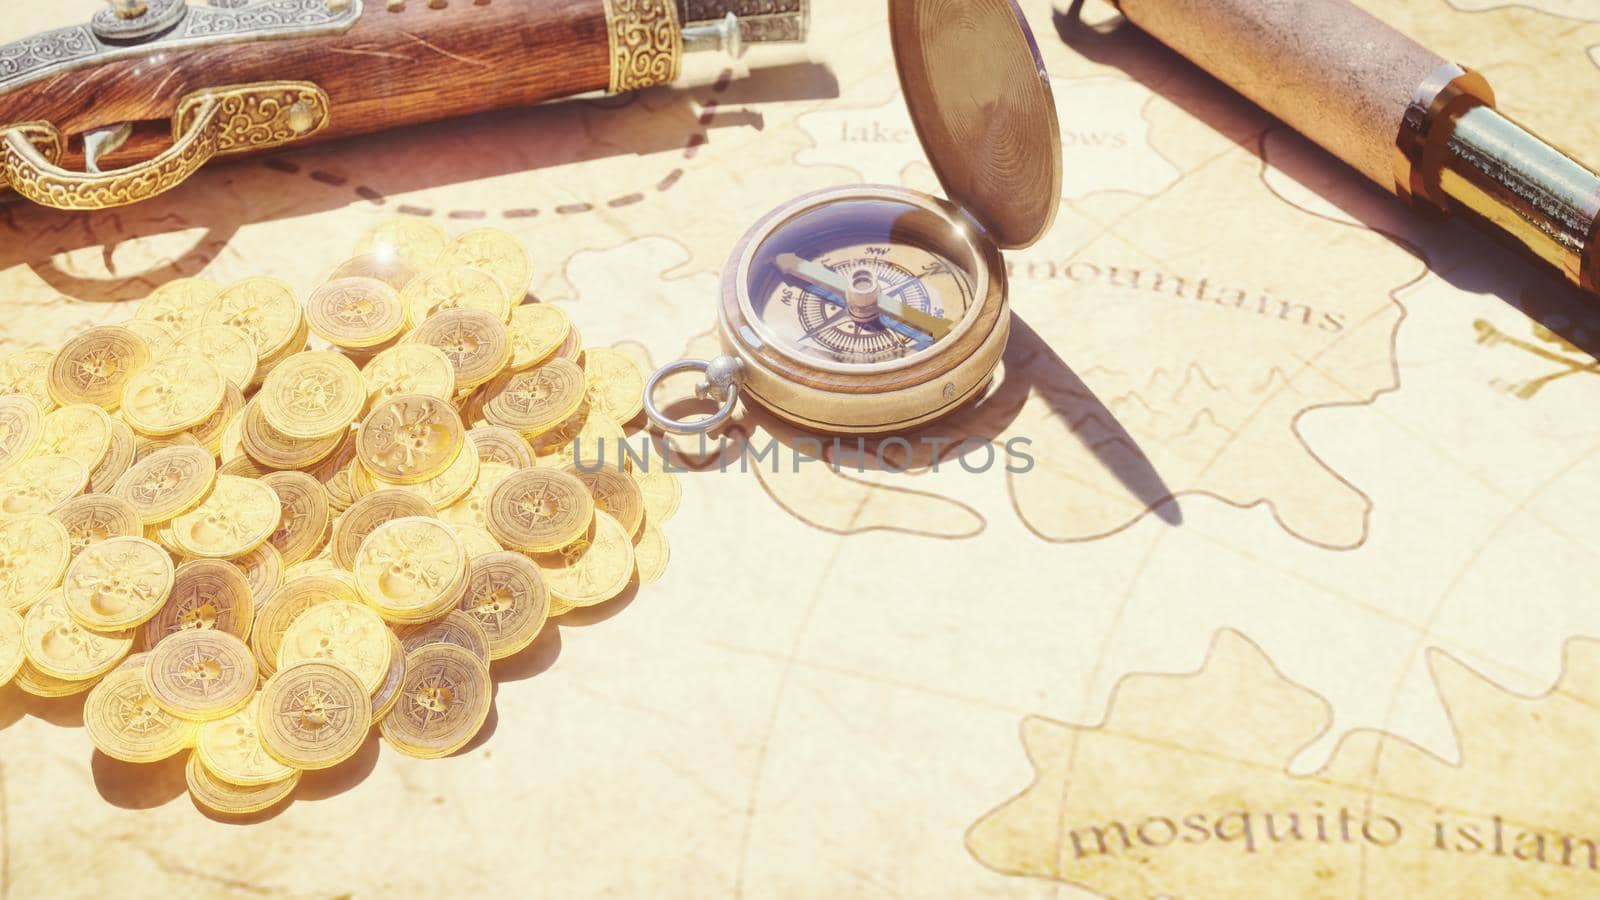 Pirate compass with pistol and spyglass lie on the treasure map. Pirate treasure and old pirate map on pirate island.